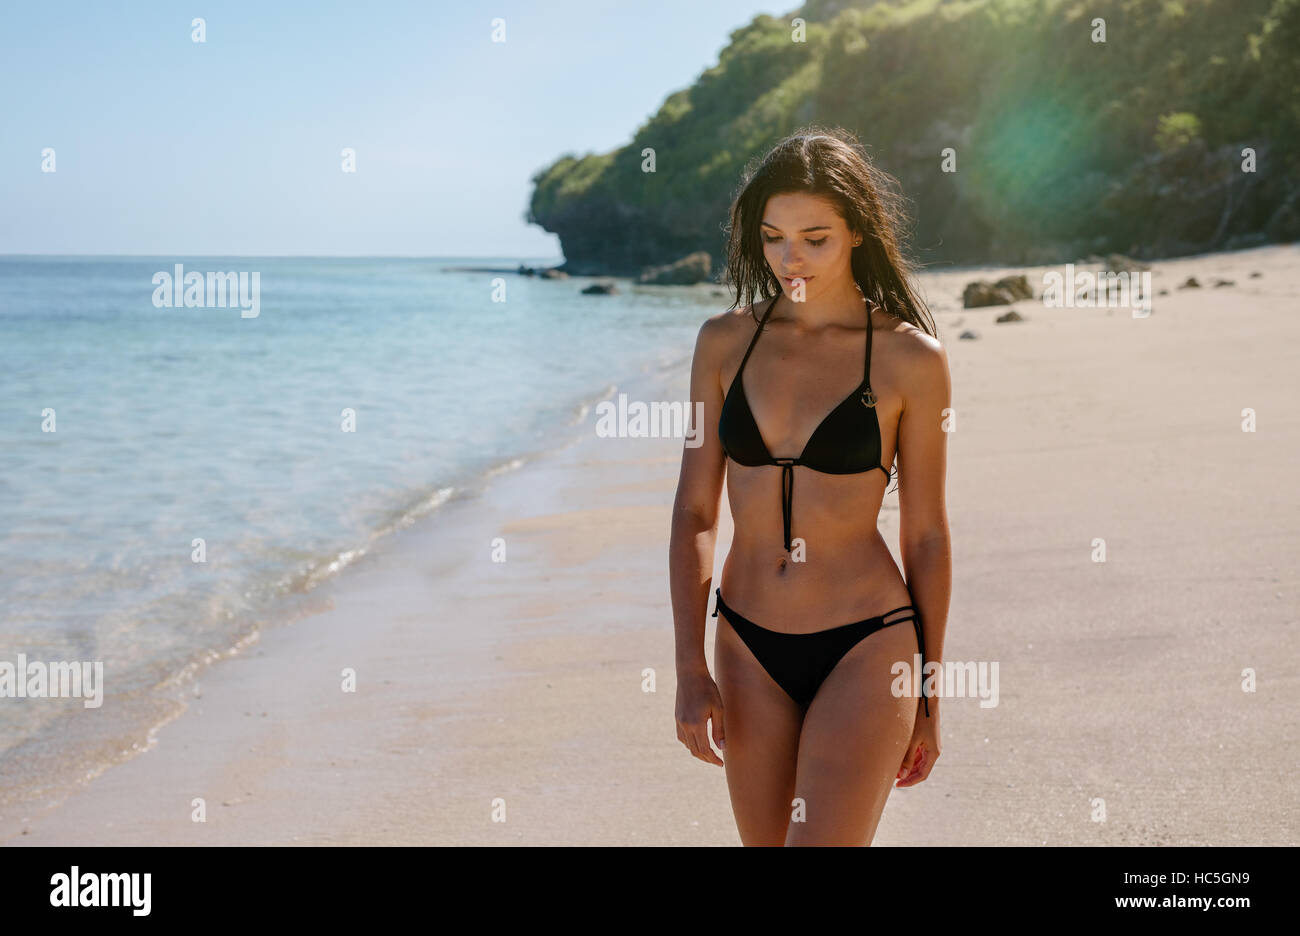 Shot of attractive young woman in bikini walking on the beach. Female model strolling along the shoreline. Stock Photo